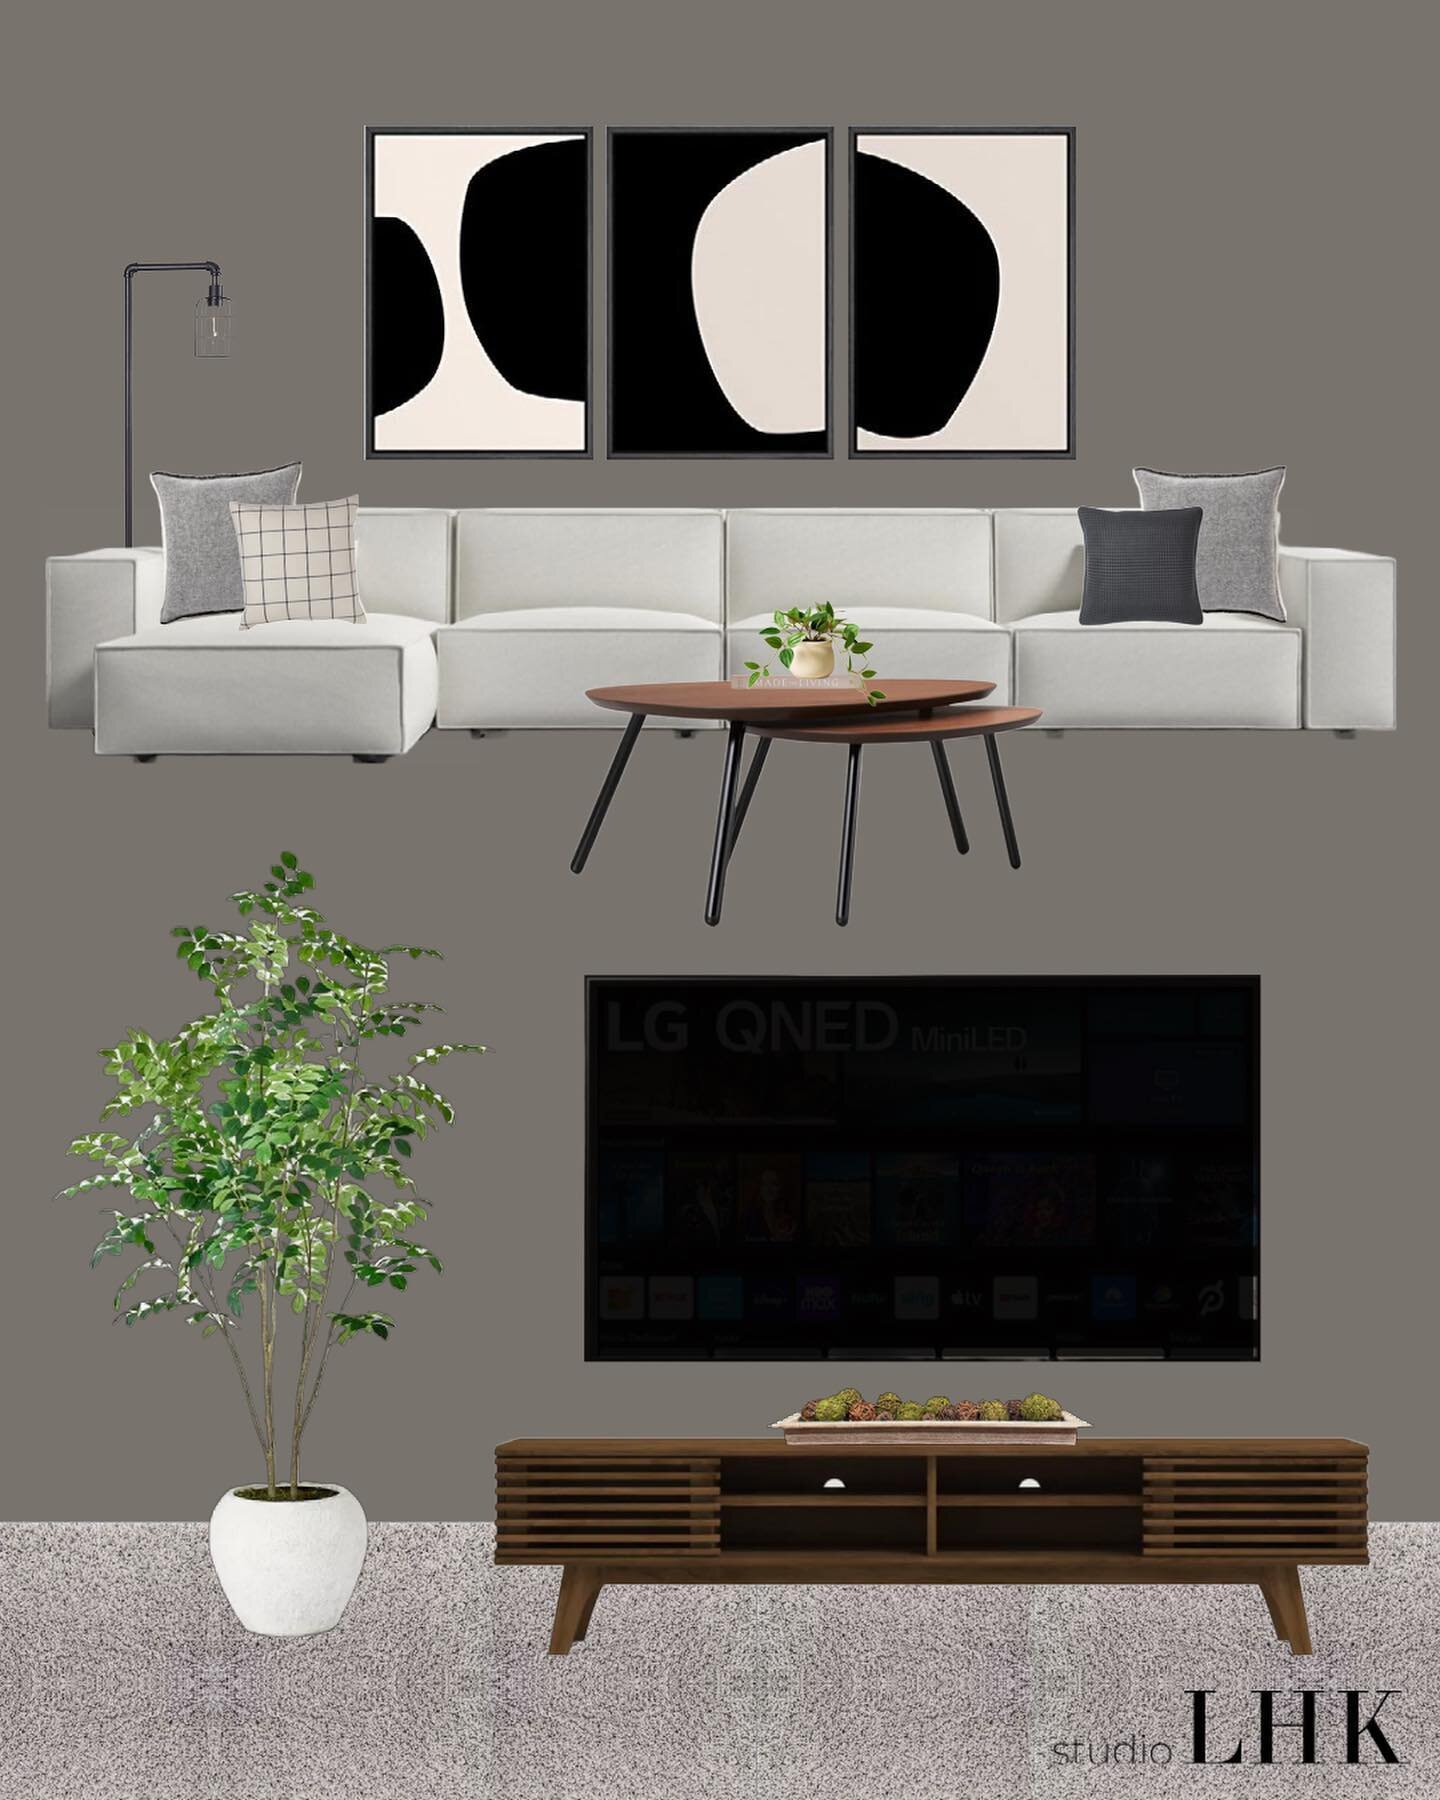 Sharing one of our latest projects - moody modern media room🎥
⠀⠀⠀⠀⠀⠀⠀ 
All the furniture was already there but just needed some finishing touches🪄 
Swipe to see how the design board turned to life!
⠀⠀⠀⠀⠀⠀⠀ 
Looking to refresh your space but don&rsq